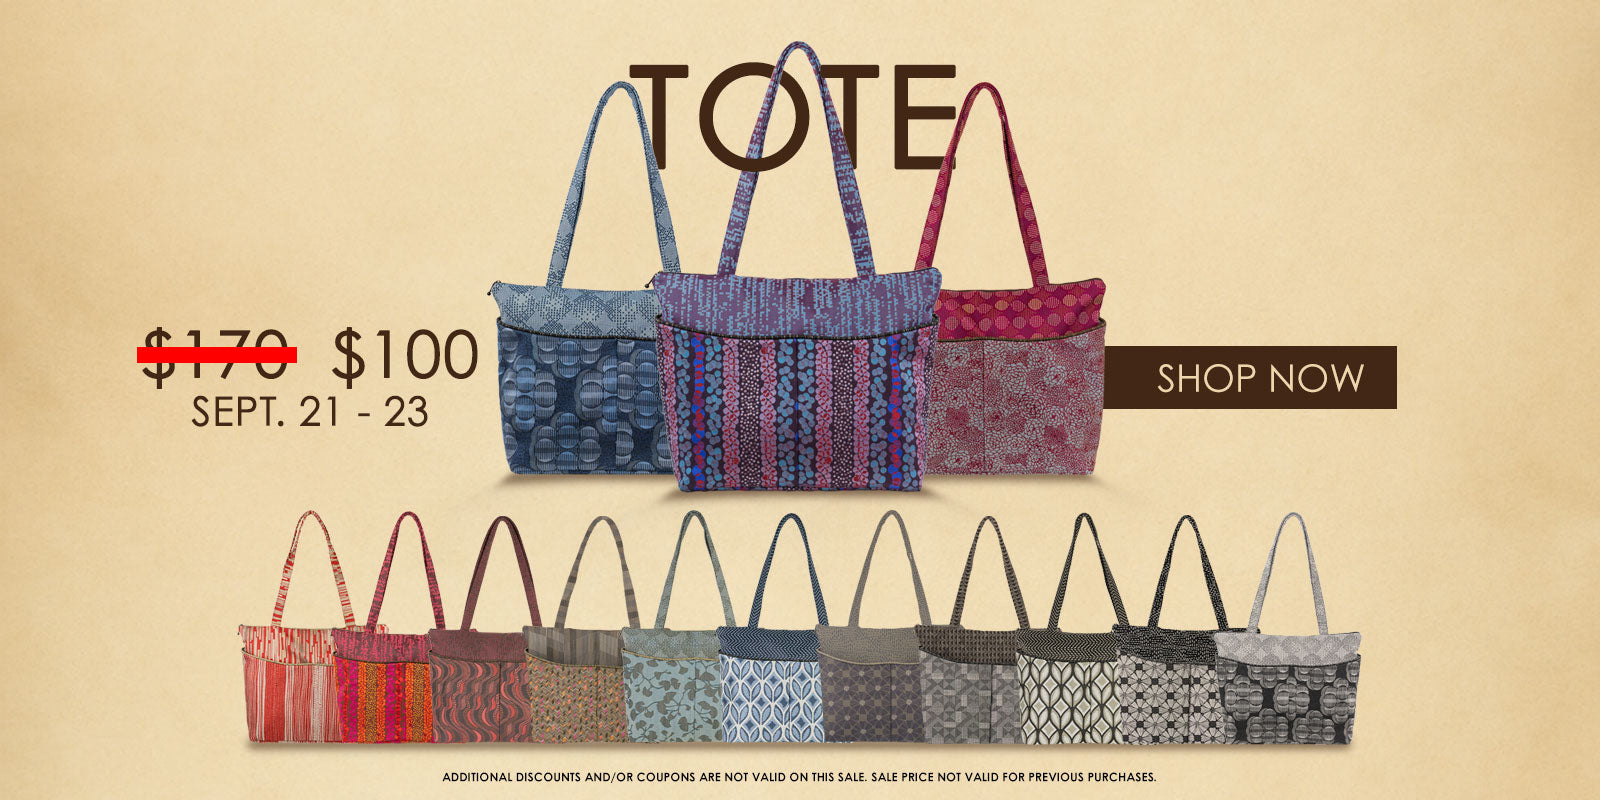 Save $70 off Totes from Sept. 21 - 23!